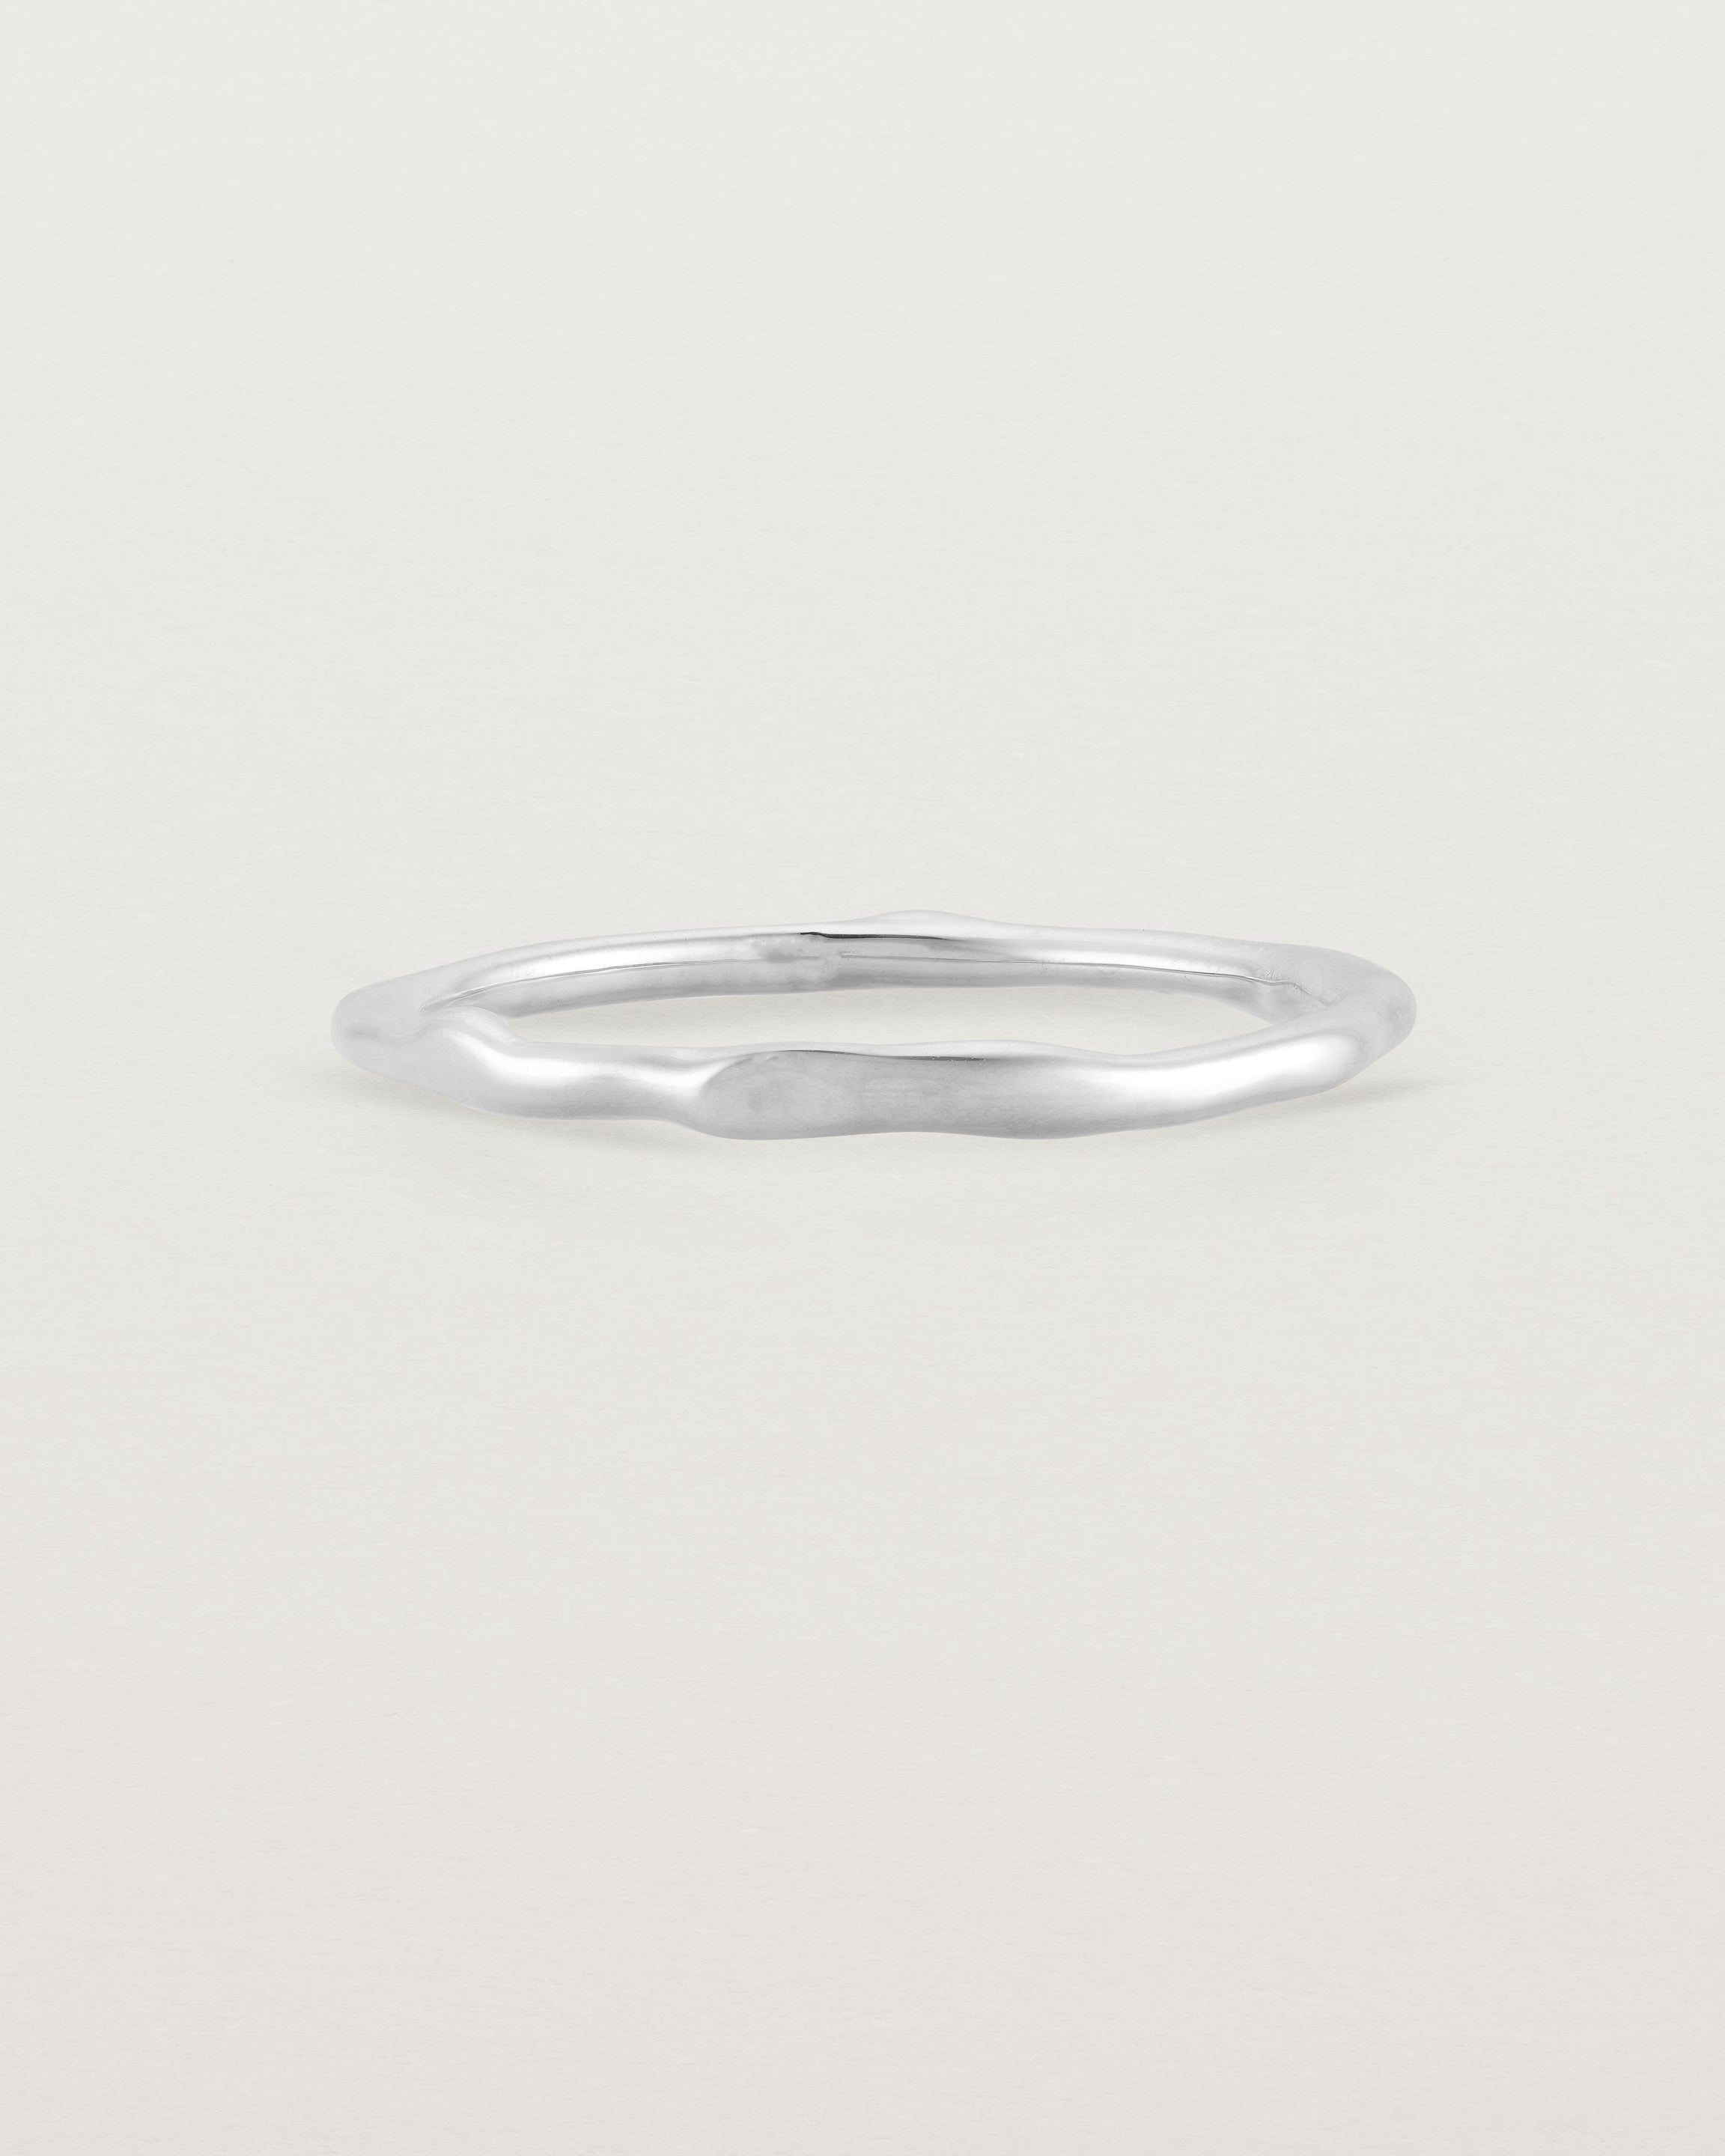 The Organic Stacking Ring in Sterling Silver